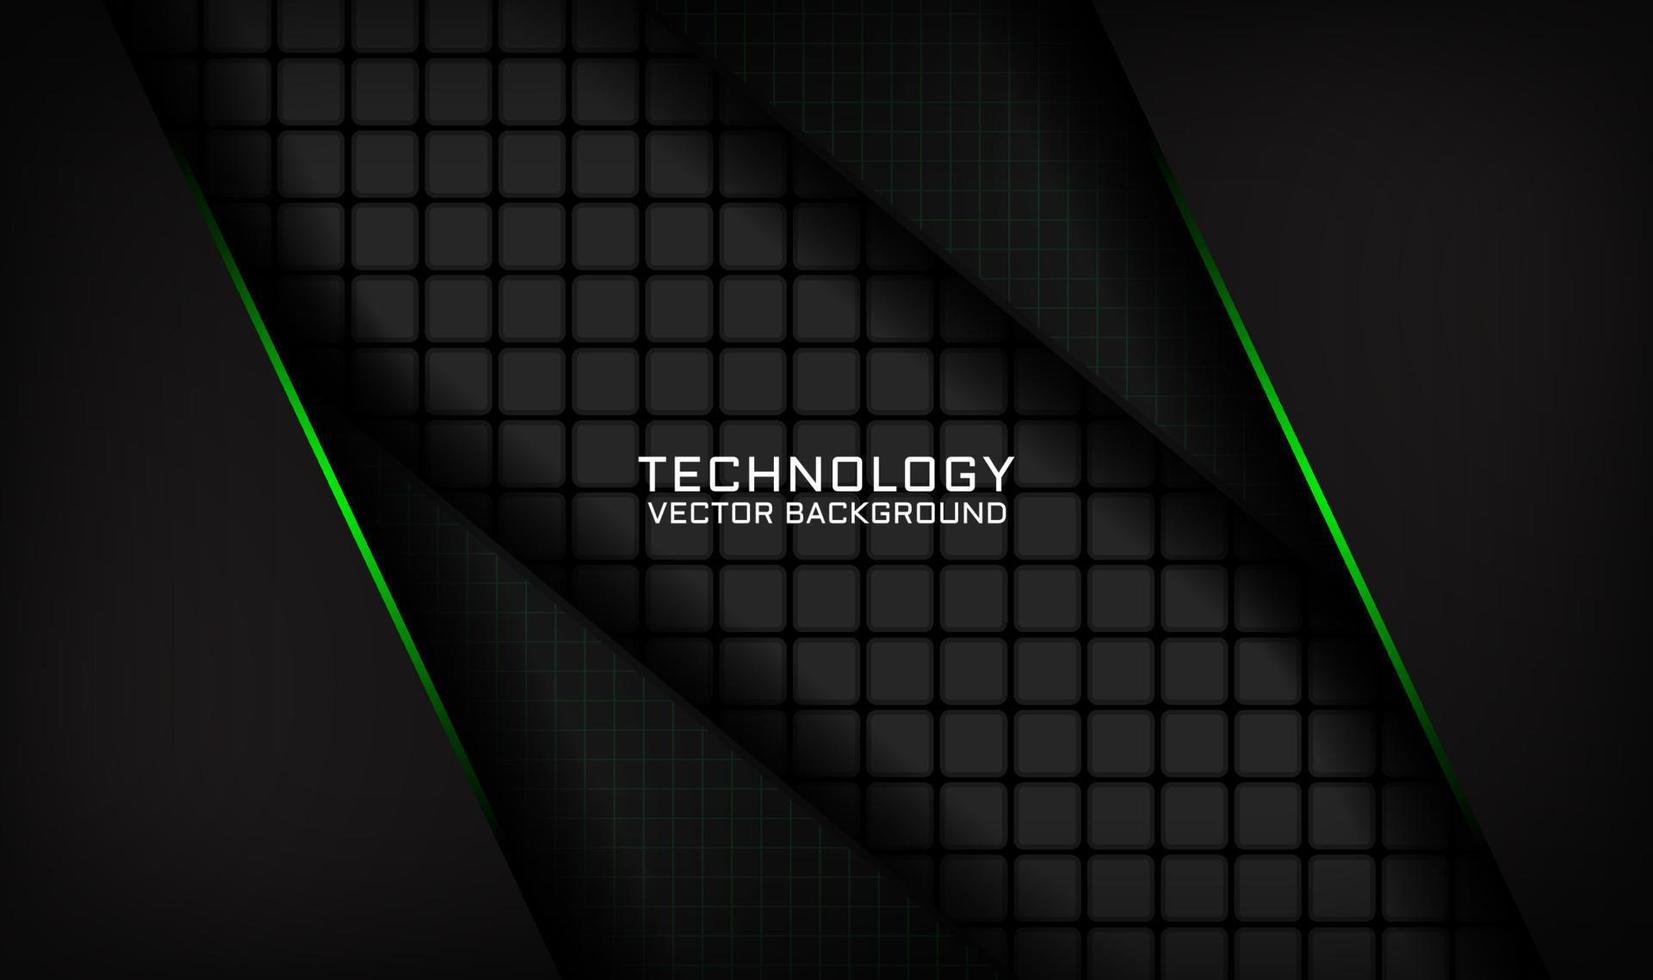 3D black technology abstract background overlap layer on dark space with green light line effect decoration. Graphic design element future style concept for banner, flyer, card, cover, or landing page vector